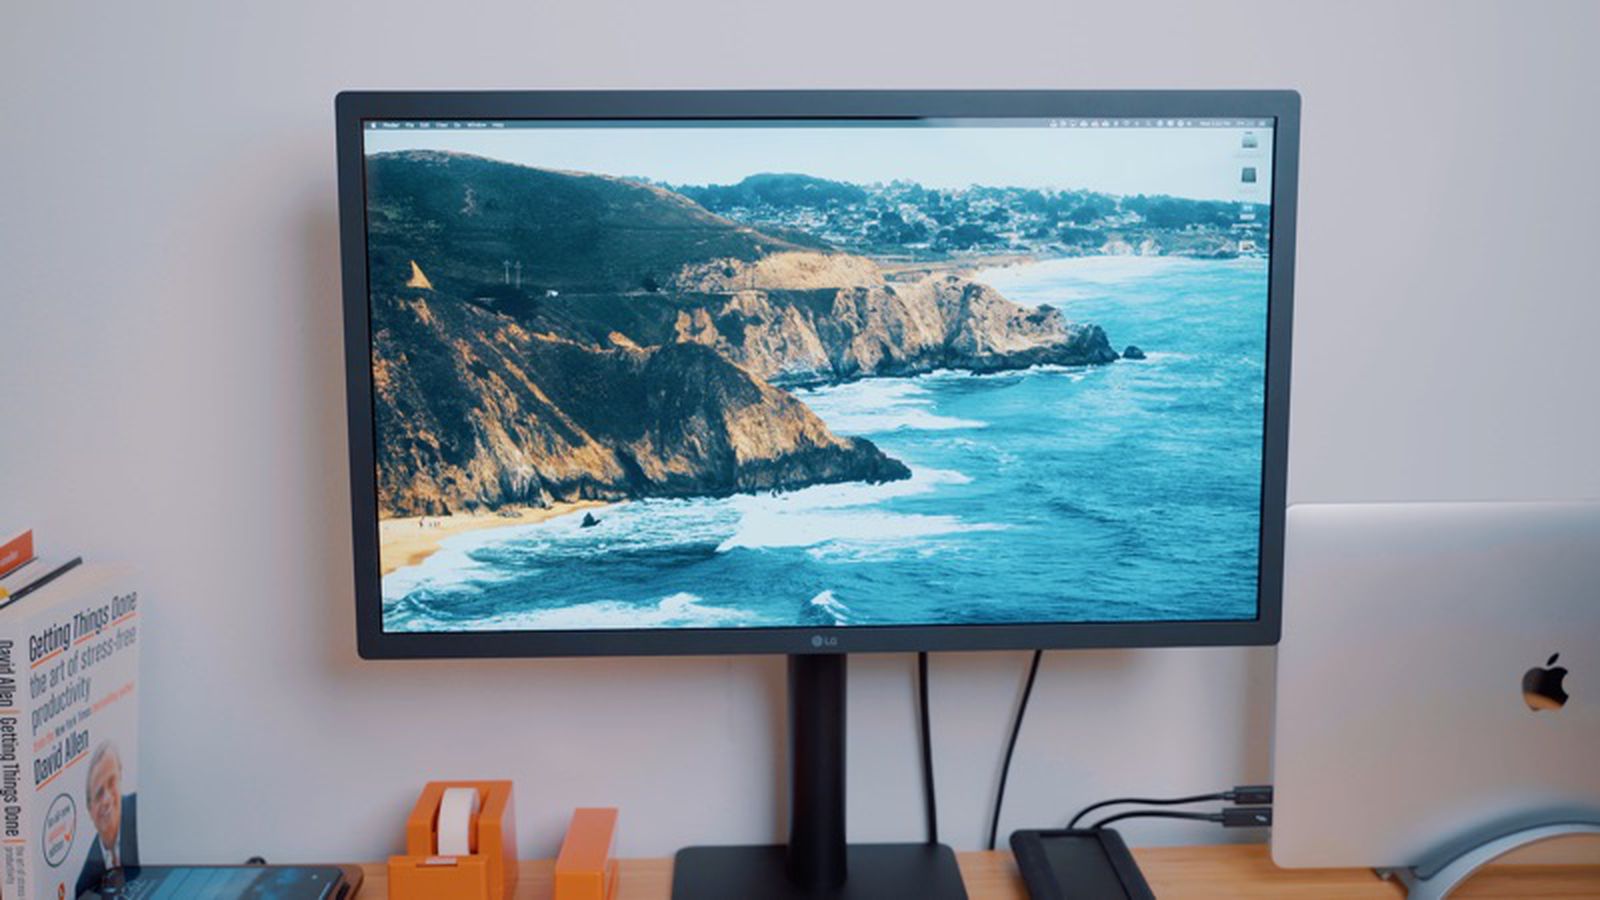 A Month with the 2019 23.7-inch LG UltraFine 4K Display - Mike Zornek